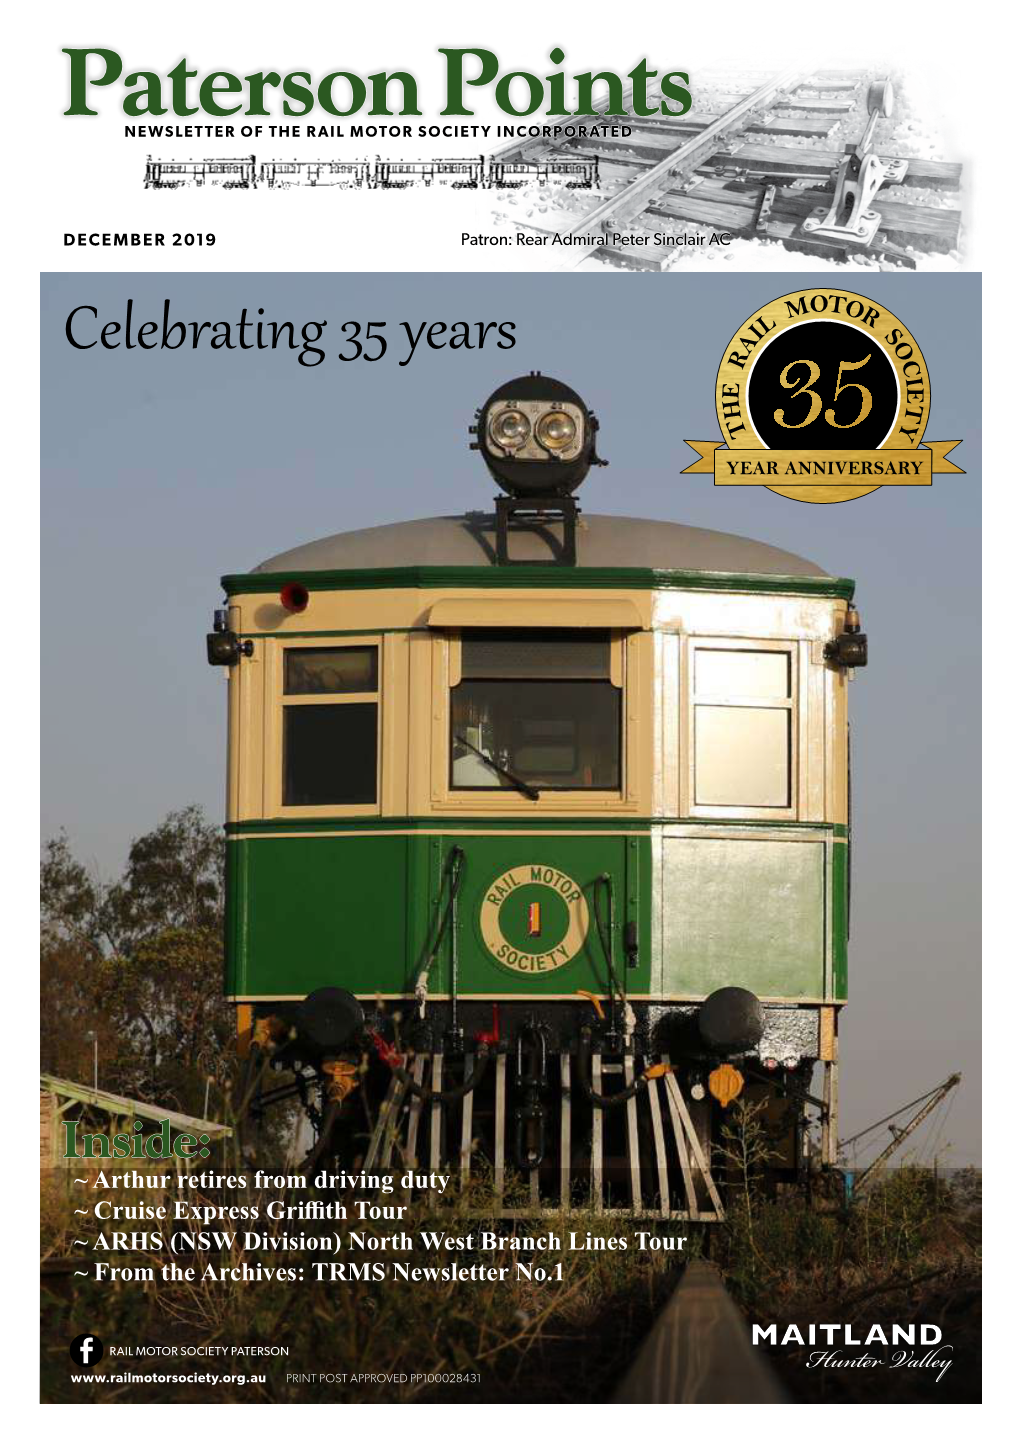 Paterson Points NEWSLETTER of the RAIL MOTOR SOCIETY INCORPORATED